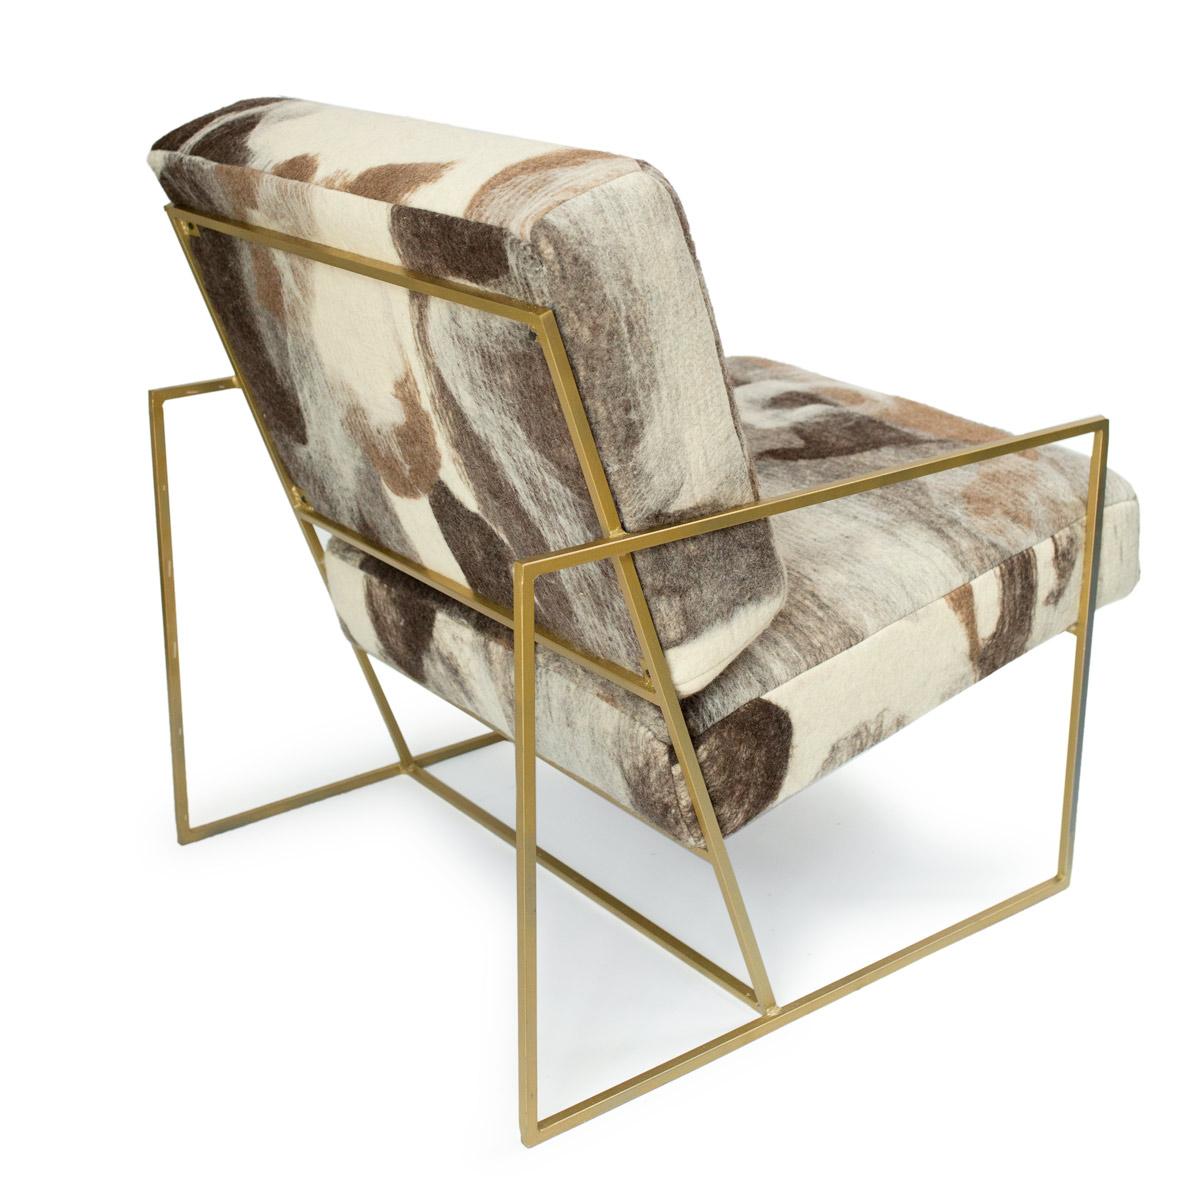 The Ziggy chair is a solid metal steel frame offered in black matte or brass colors and is the perfect showcase for JG SWITZER's felted, wool fabric. 

Fabric yardage is a one-of-a-kind, 